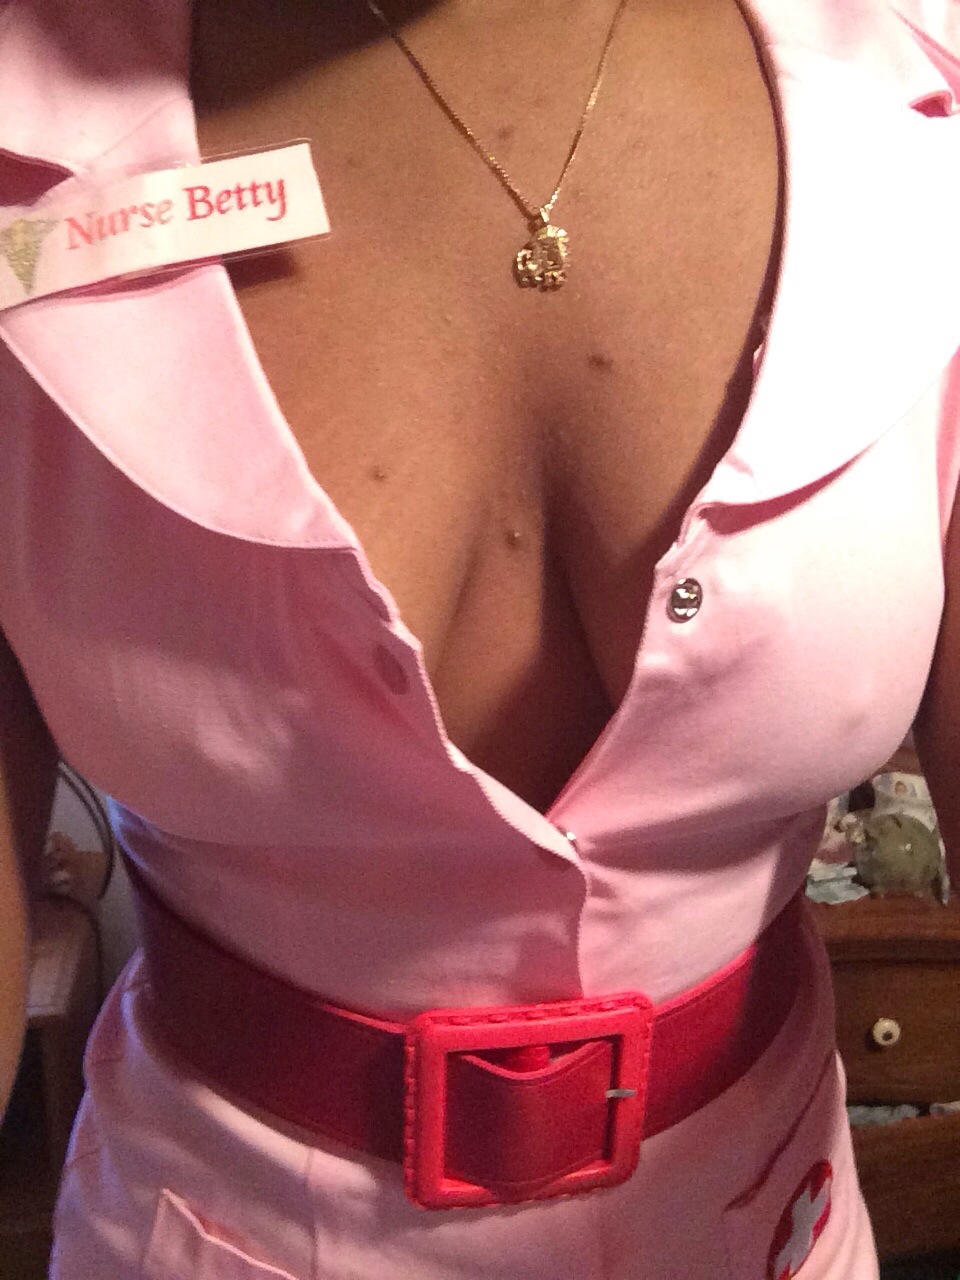 Cara in a pink and red sexy nurse costume that has a name tag that says nurse Betty in post titled Pet Hold